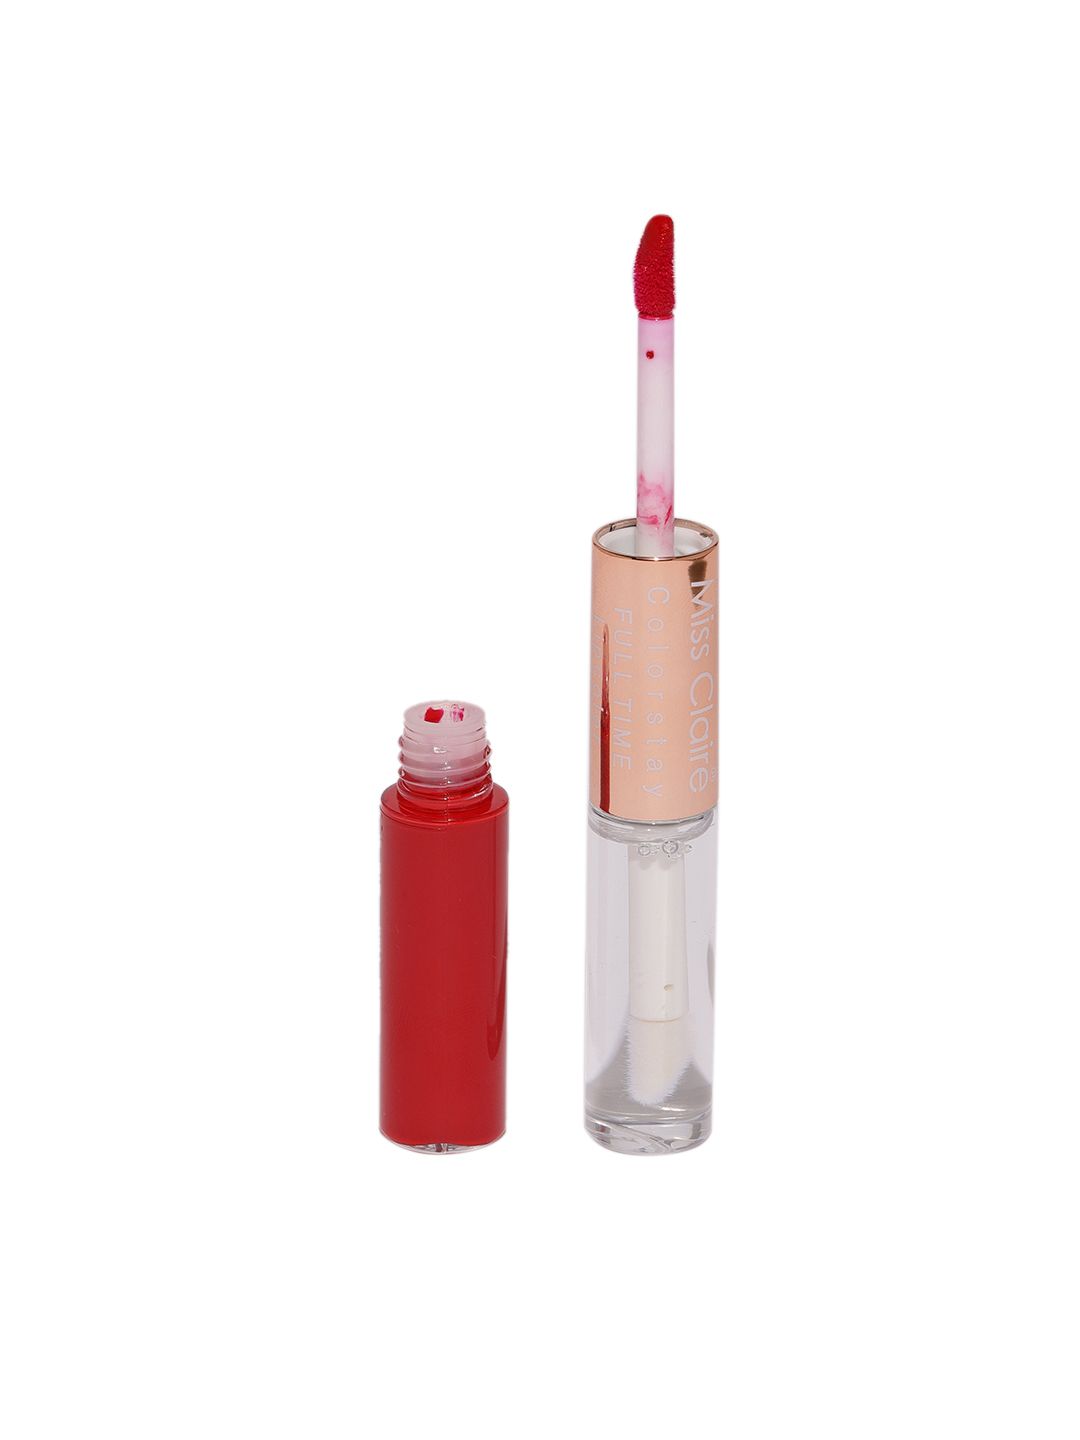 Miss Claire 1 Colorstay Full Time Lipcolor 10ml Price in India